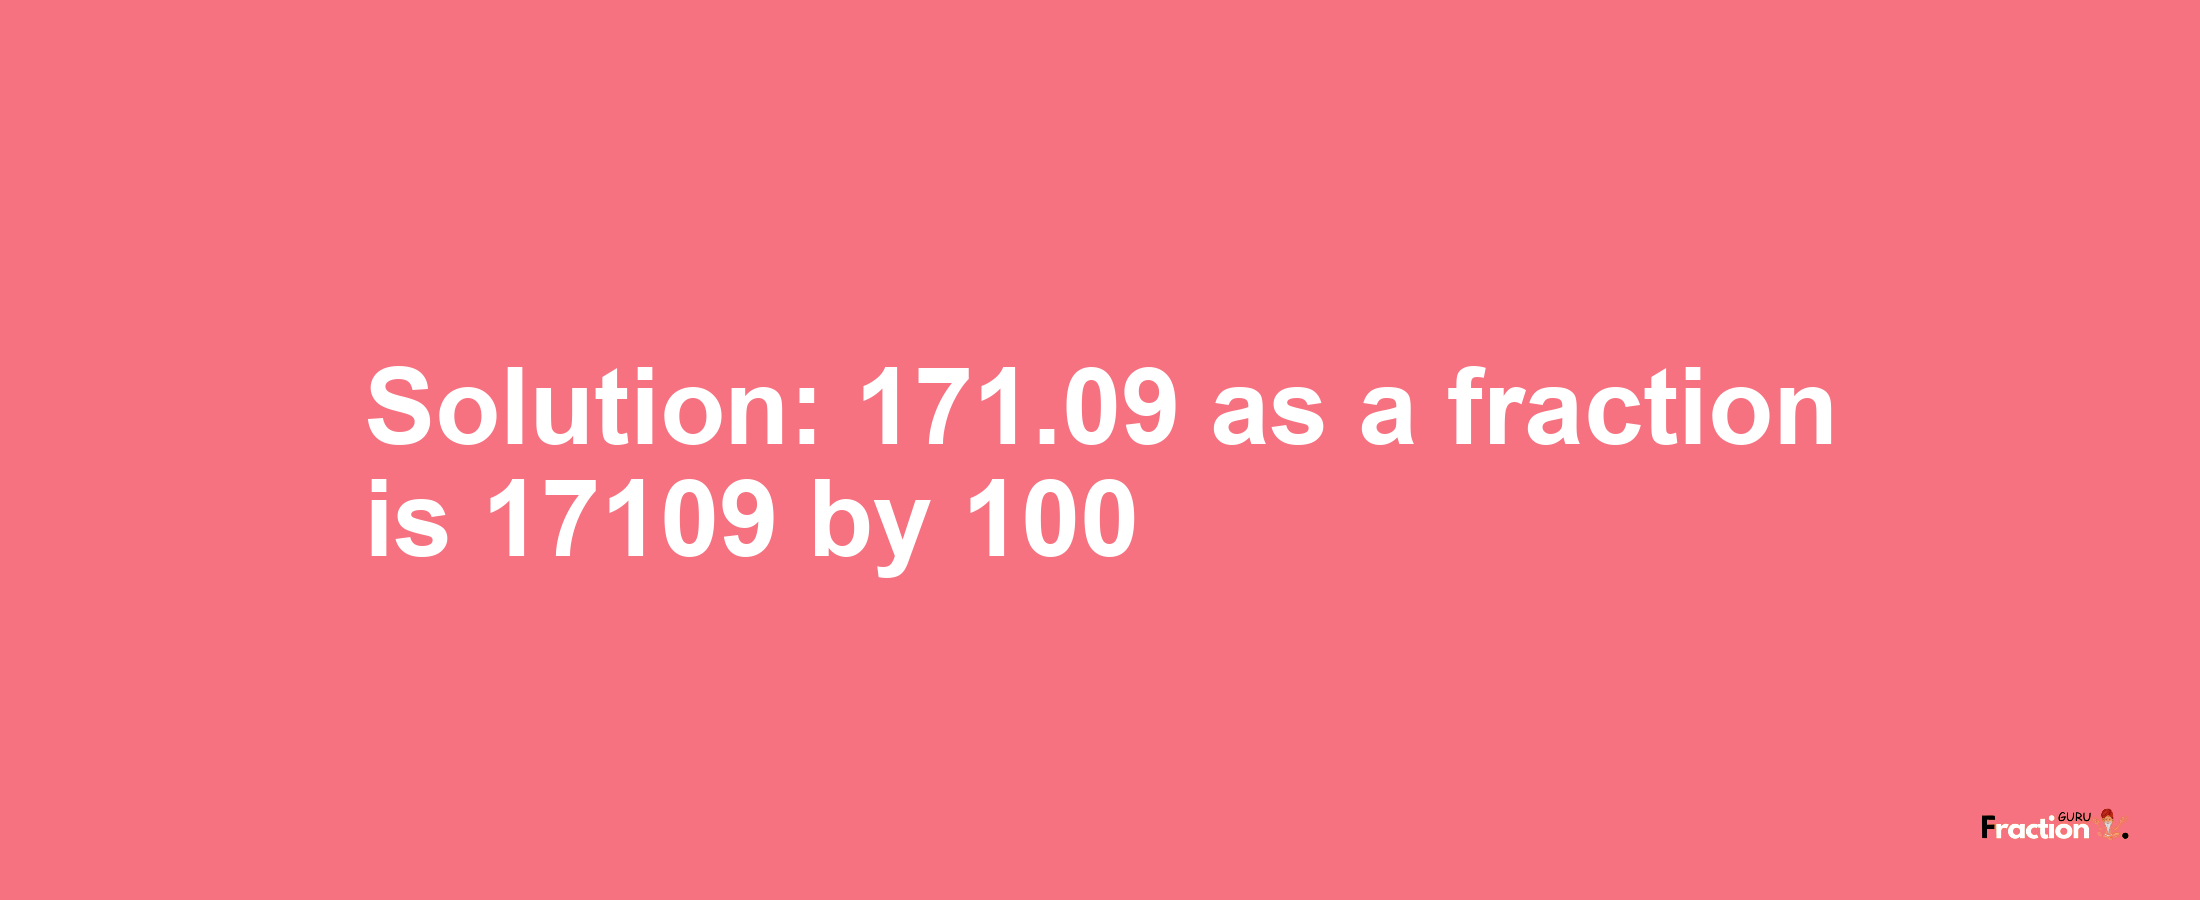 Solution:171.09 as a fraction is 17109/100